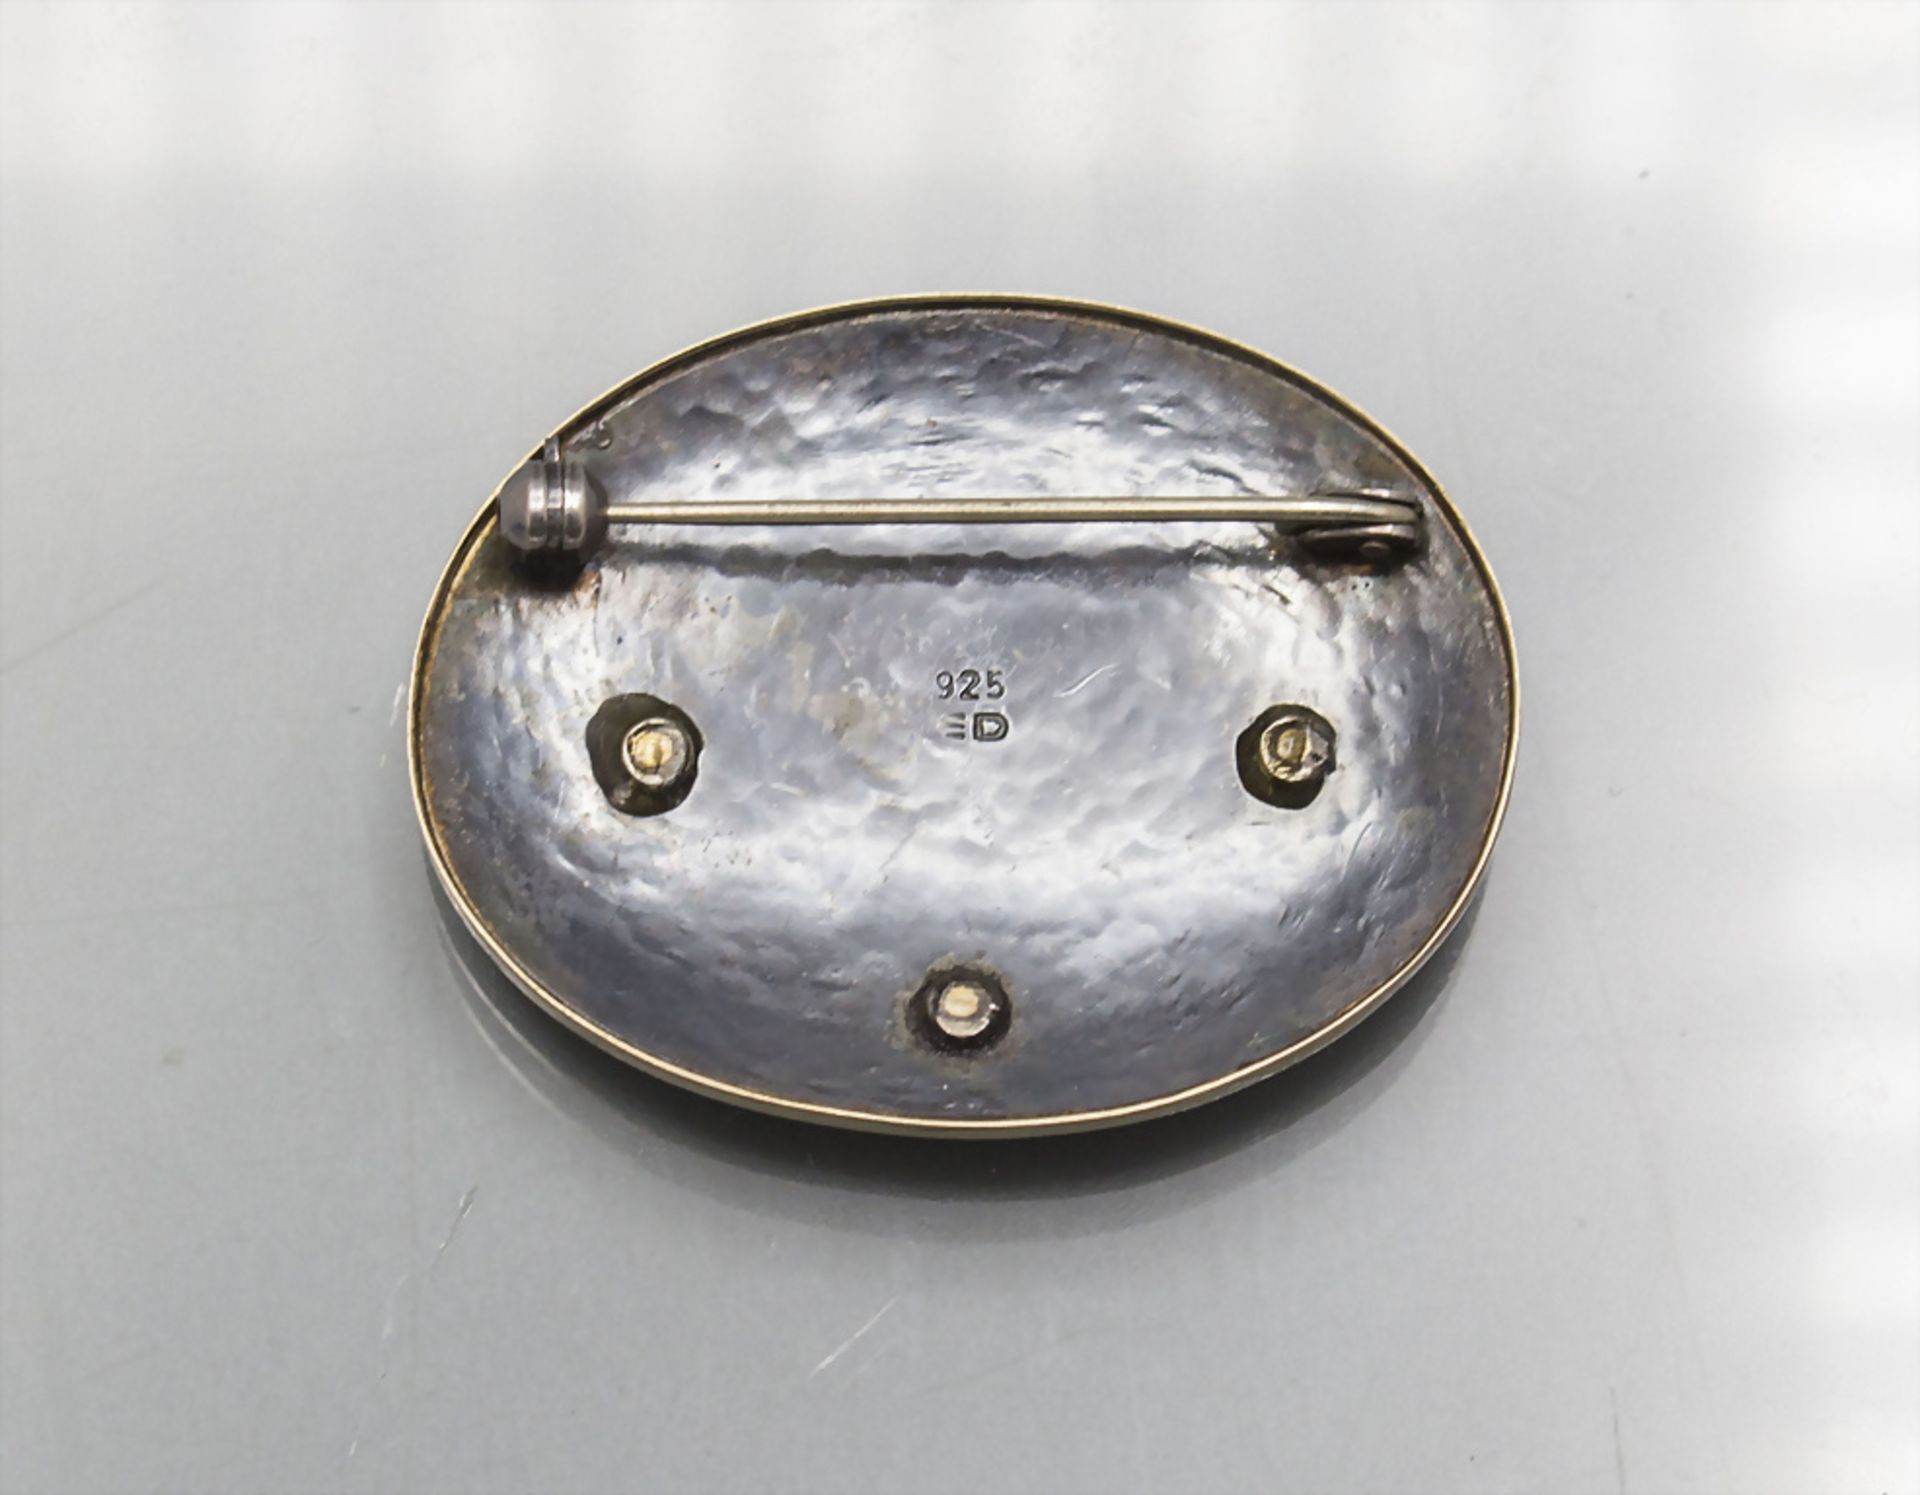 Silber/Gold Brosche / A silver and 19 ct gold brooch, Eberhard Dechow, Neustadt, um 2005 - Image 2 of 2